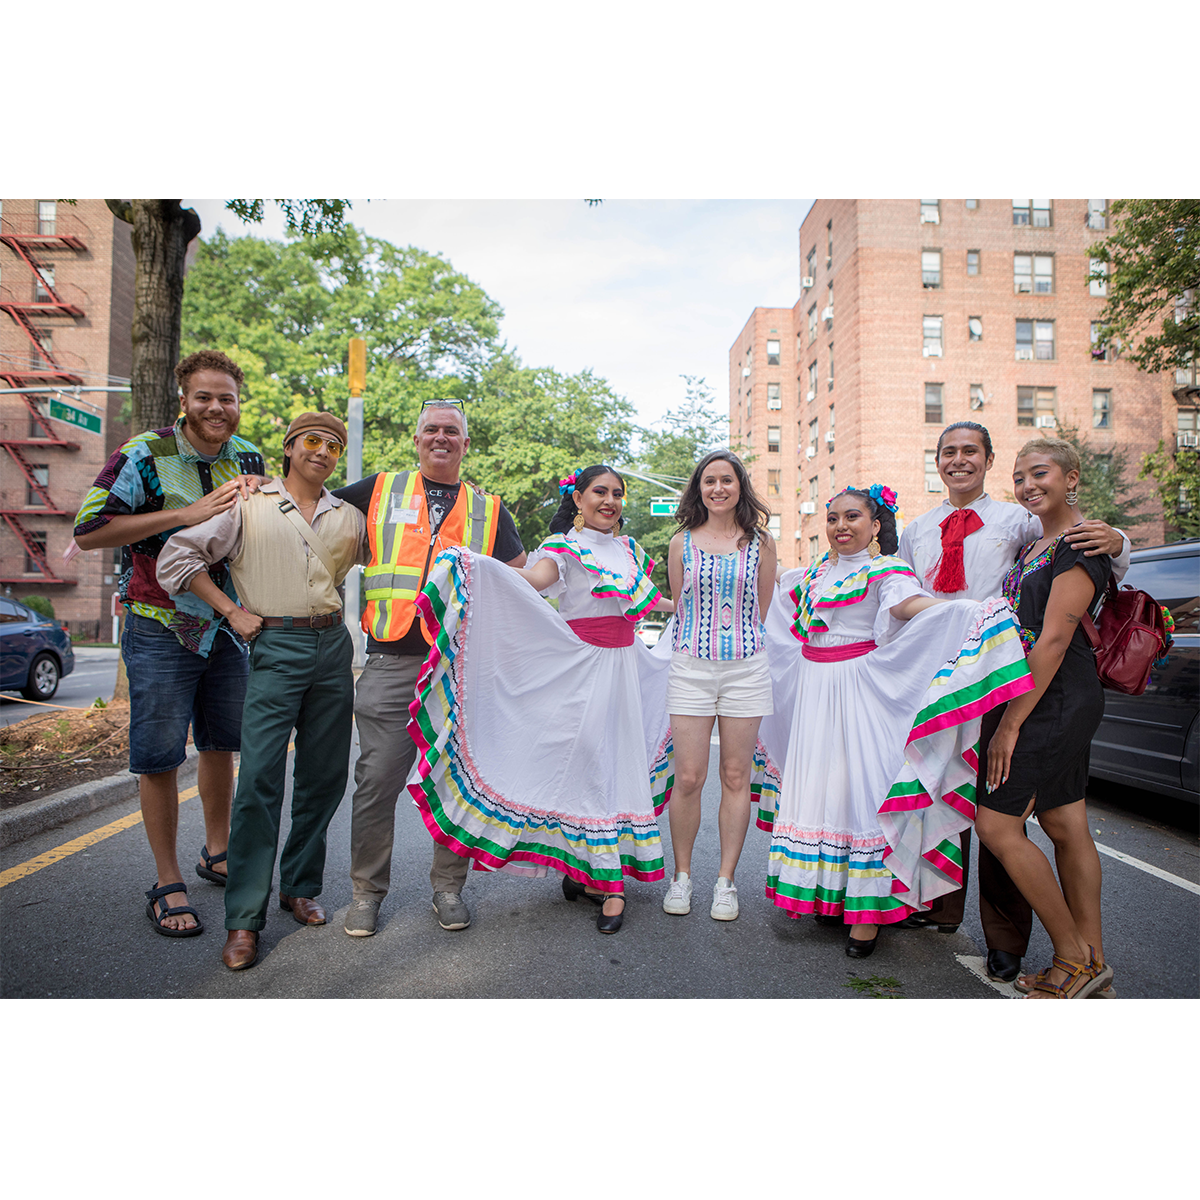 34th Avenue Oral History participants pose for a photo on the Open Street after the launch event. Narrators Manuela Agudelo, Jim Burke, and Erick Modesto stand with oral historian Bridget Bartolini and dancers from Ballet Folklorico Nueva Juventud, who are wearing traditional Mexican costumes.